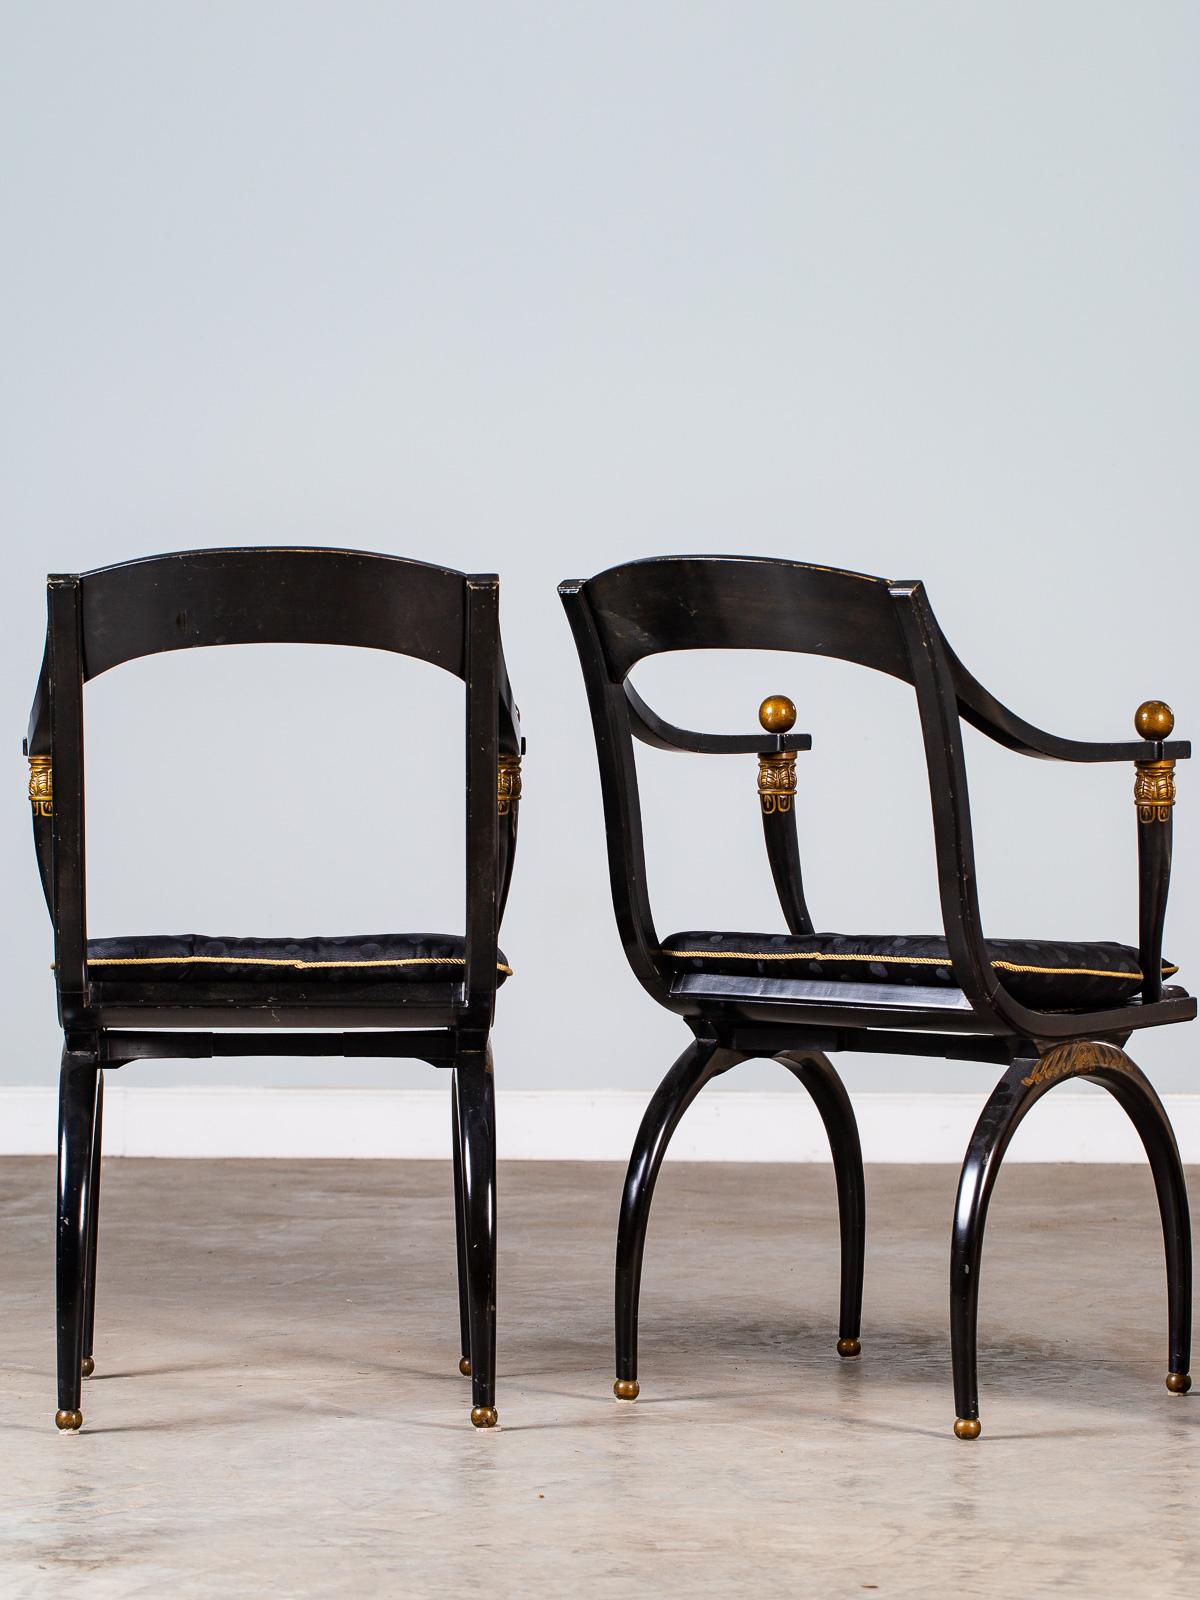 Pair of Vintage French Empire Chapuis Ebonized Gilt Chairs, circa 1950 im Angebot 7